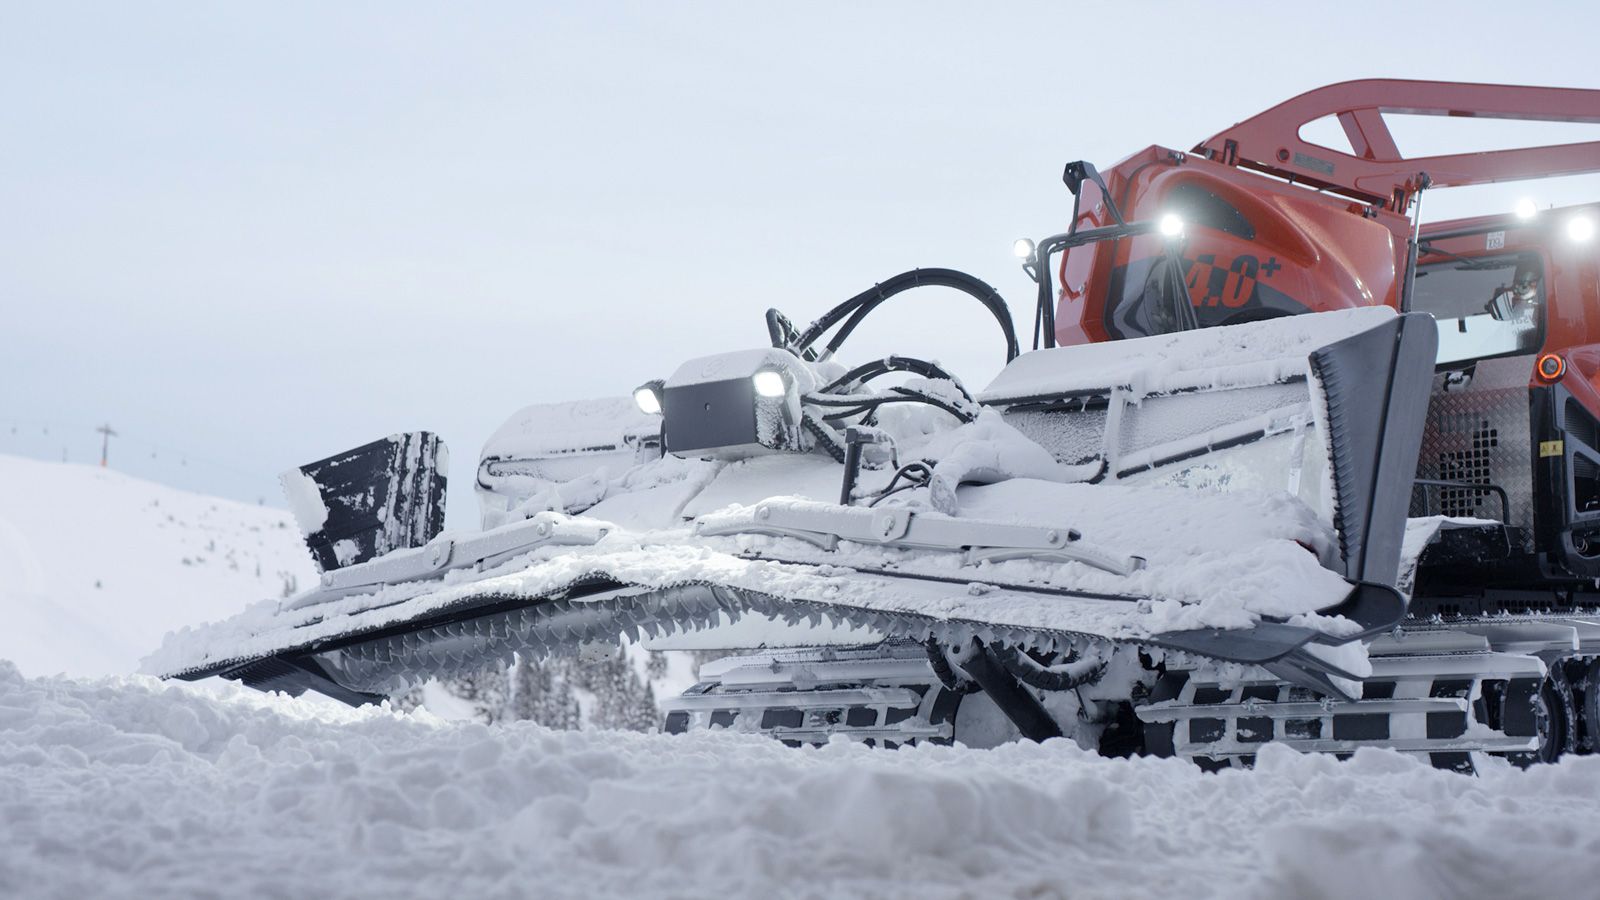 Optimum adaption to the conditions of the slope thanks to the ProFlexTiller